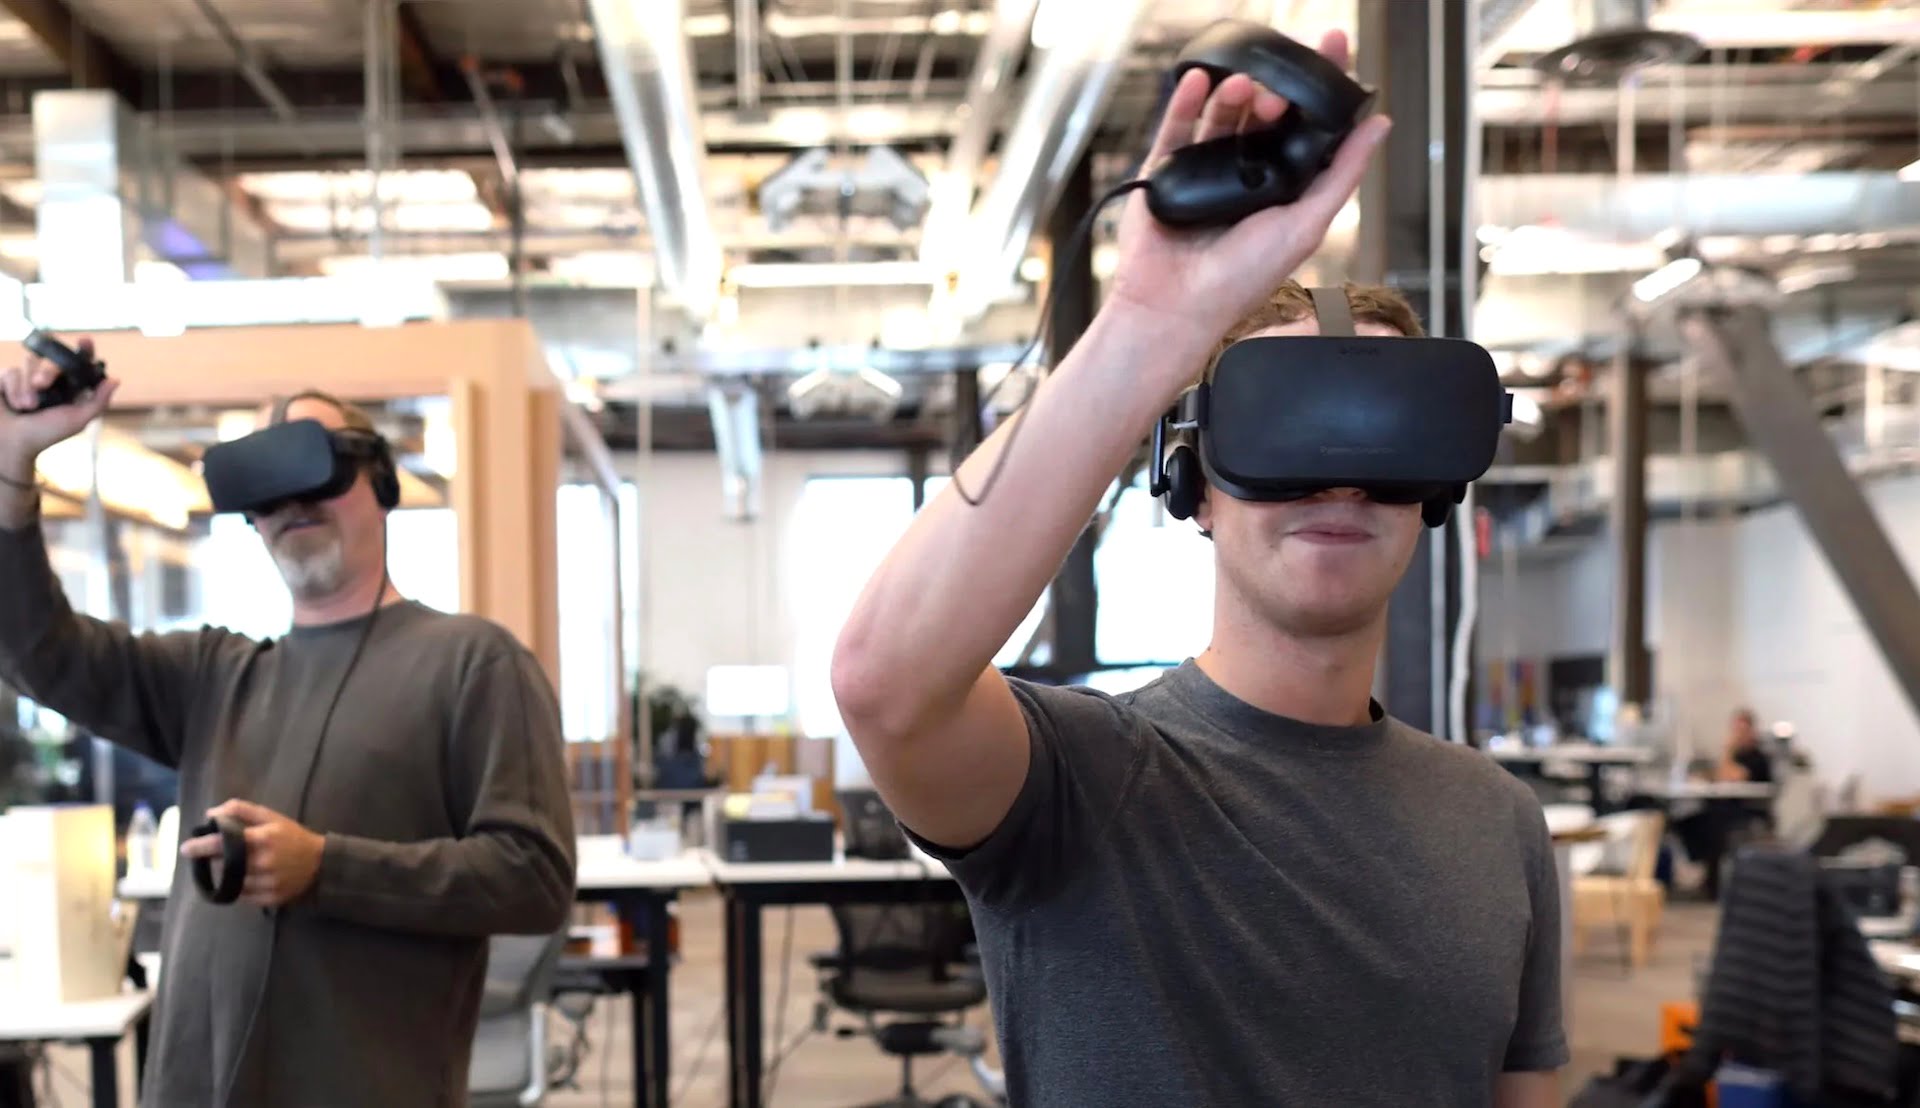 Cody Woputz gave Mark Zuckerberg a VR demo in 2014 - and learned something valuable